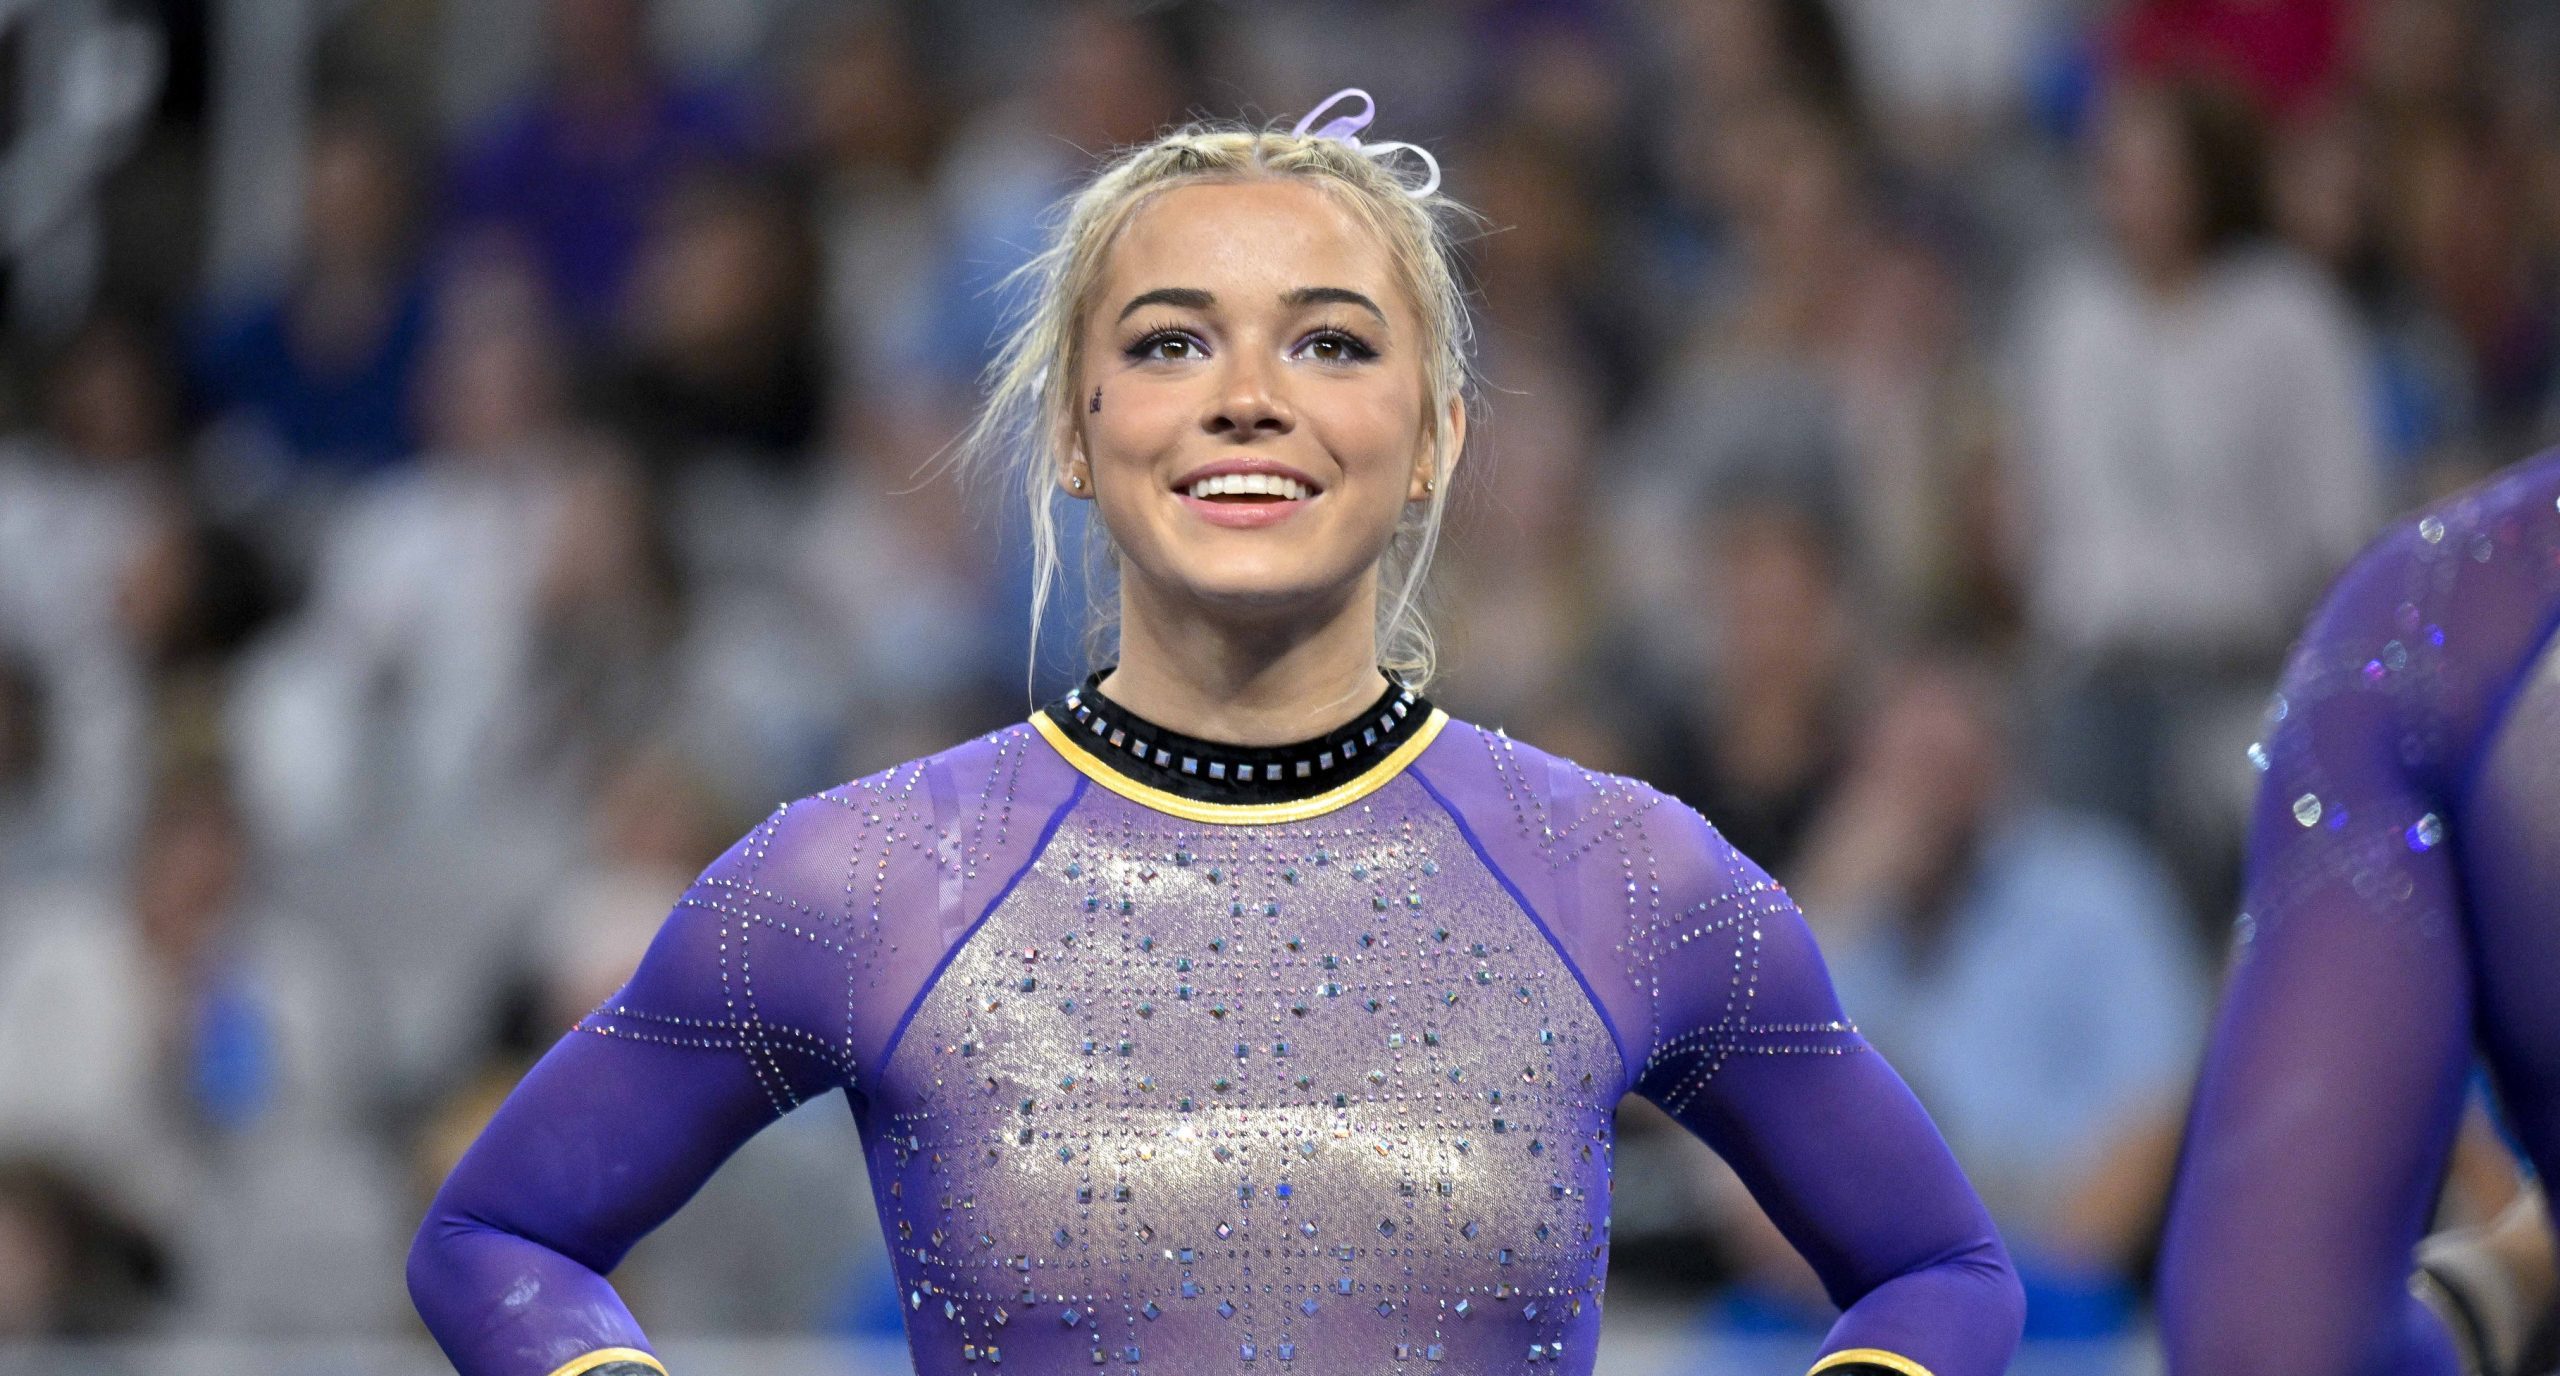 LSU Tigers gymnast Olivia Dunne warms up with her team on floor during the NCAA Women's National Gymnastics Tournament Championship at Dickies Arena.